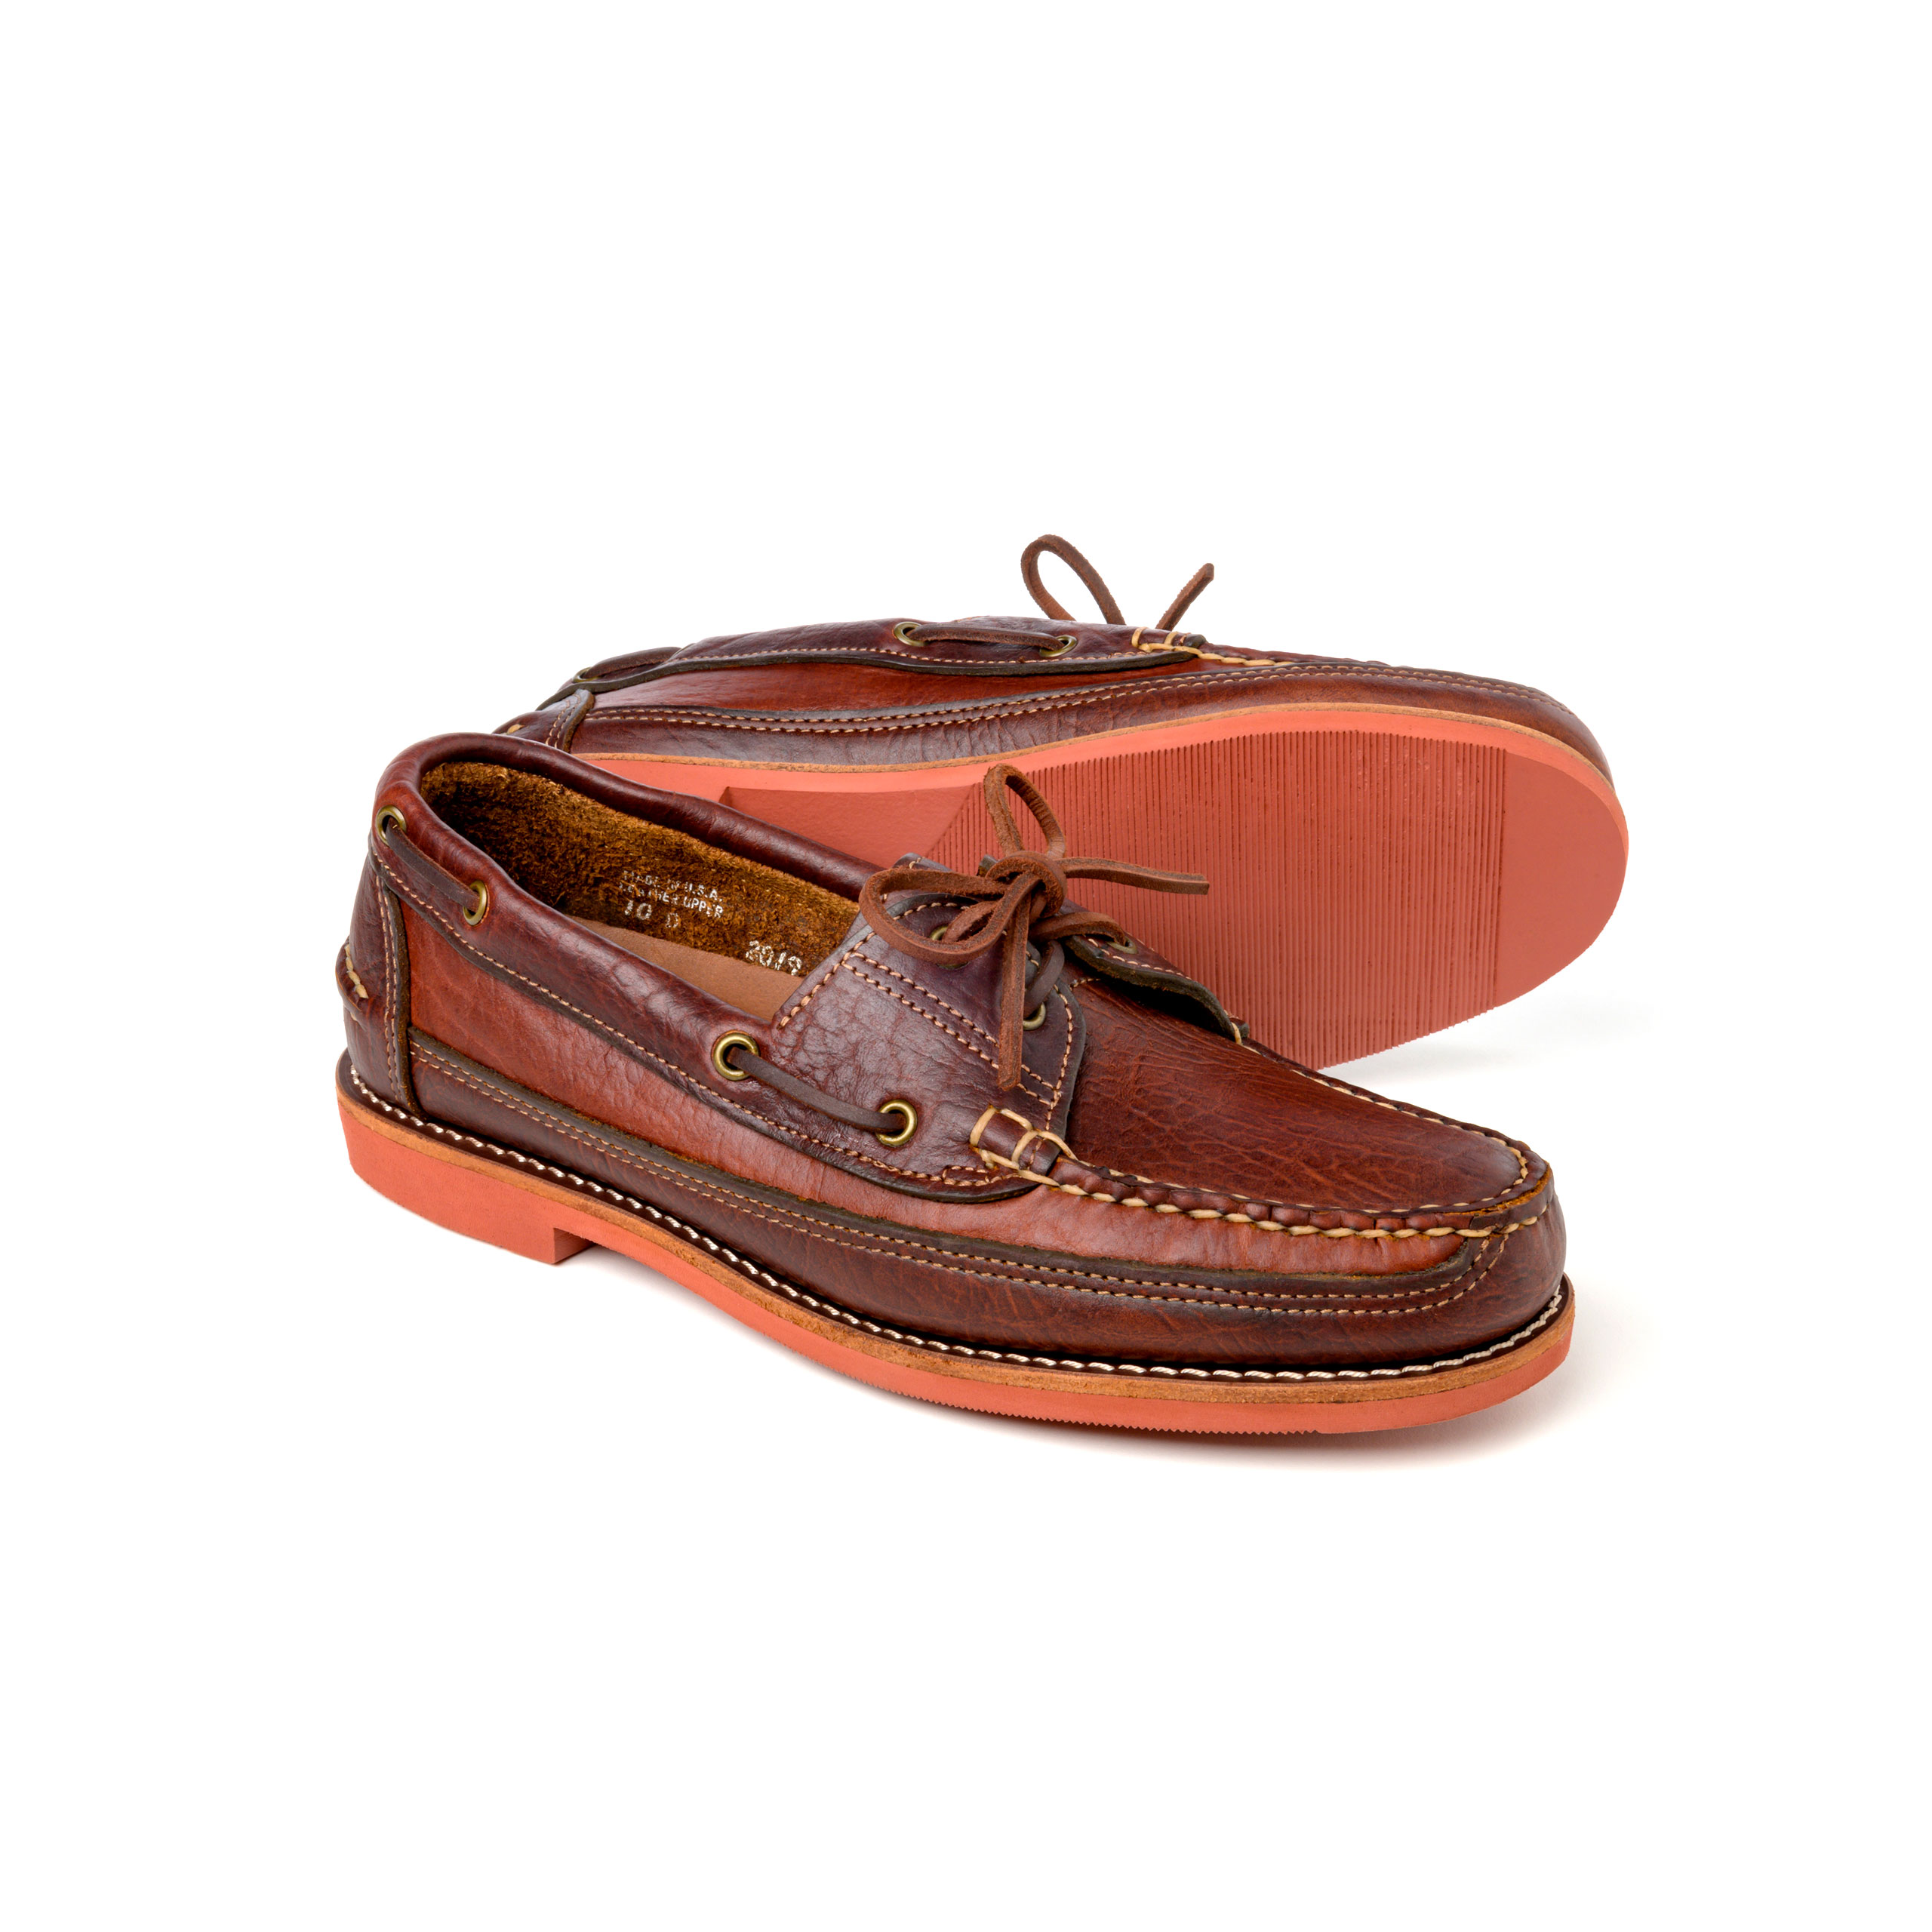 moccasin dress shoes